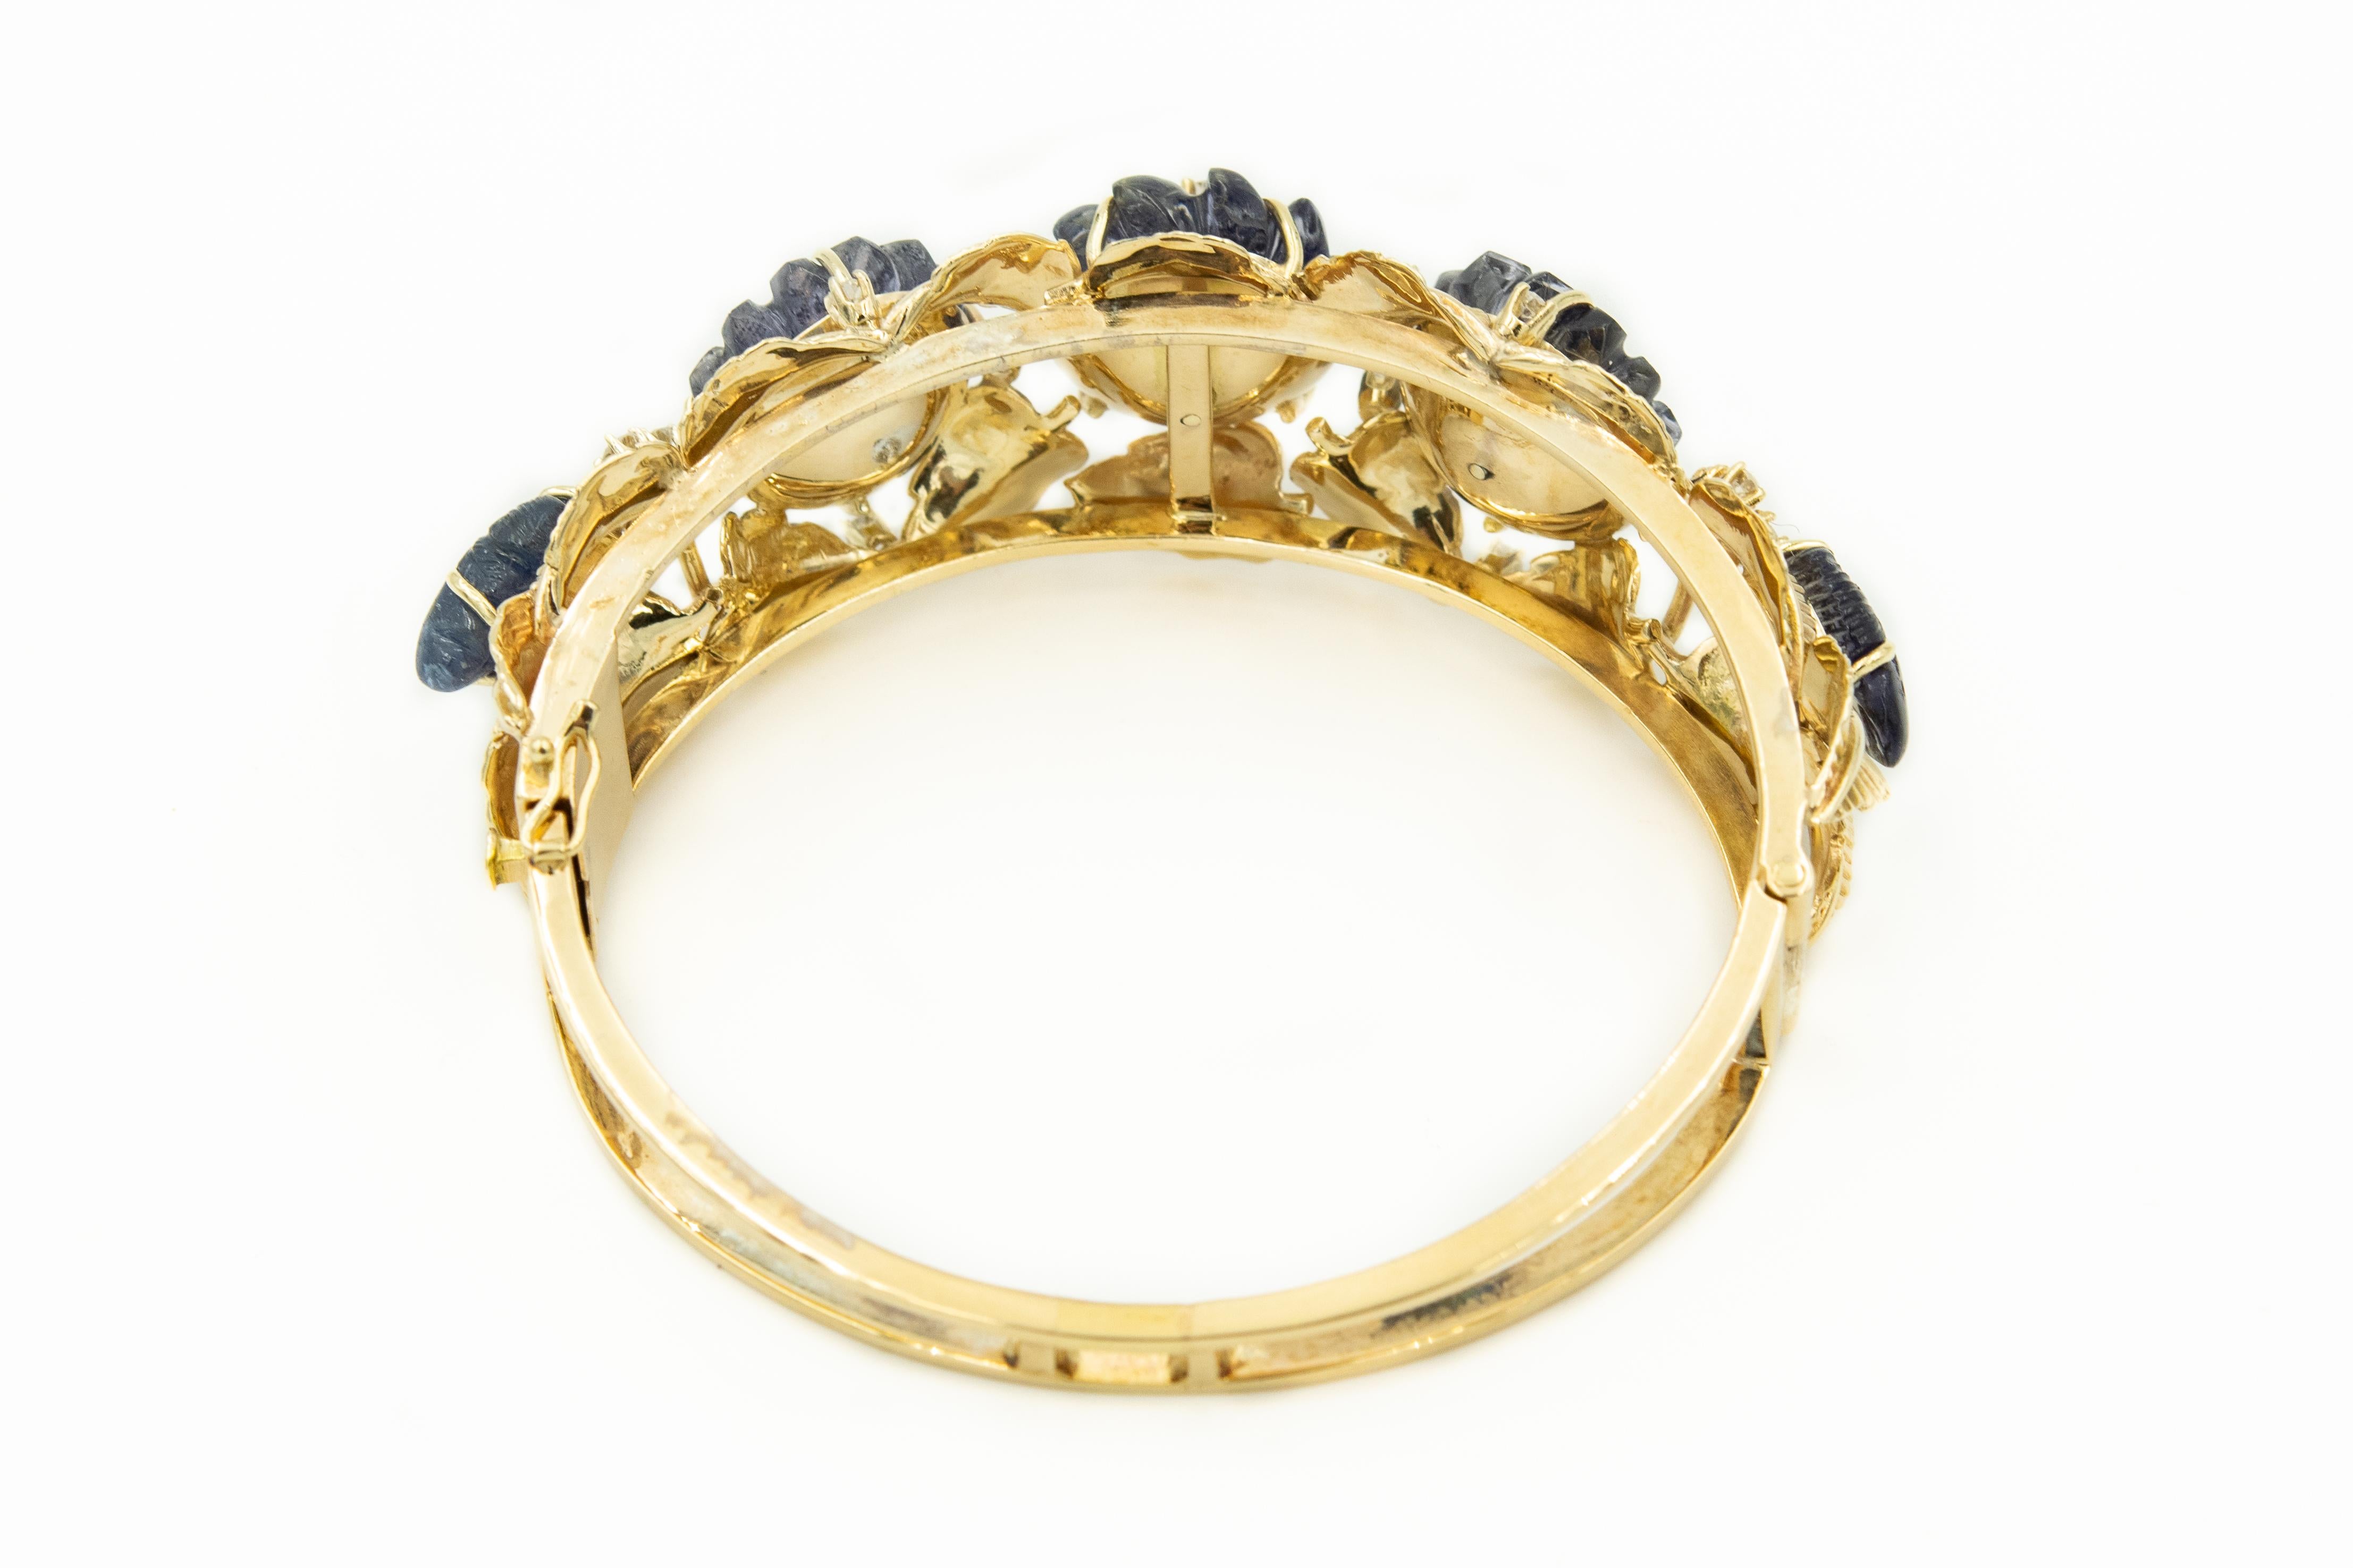 Carved Sapphire Floral Flower Leaf Diamond Yellow Gold Bangle Bracelet In Good Condition For Sale In Miami Beach, FL